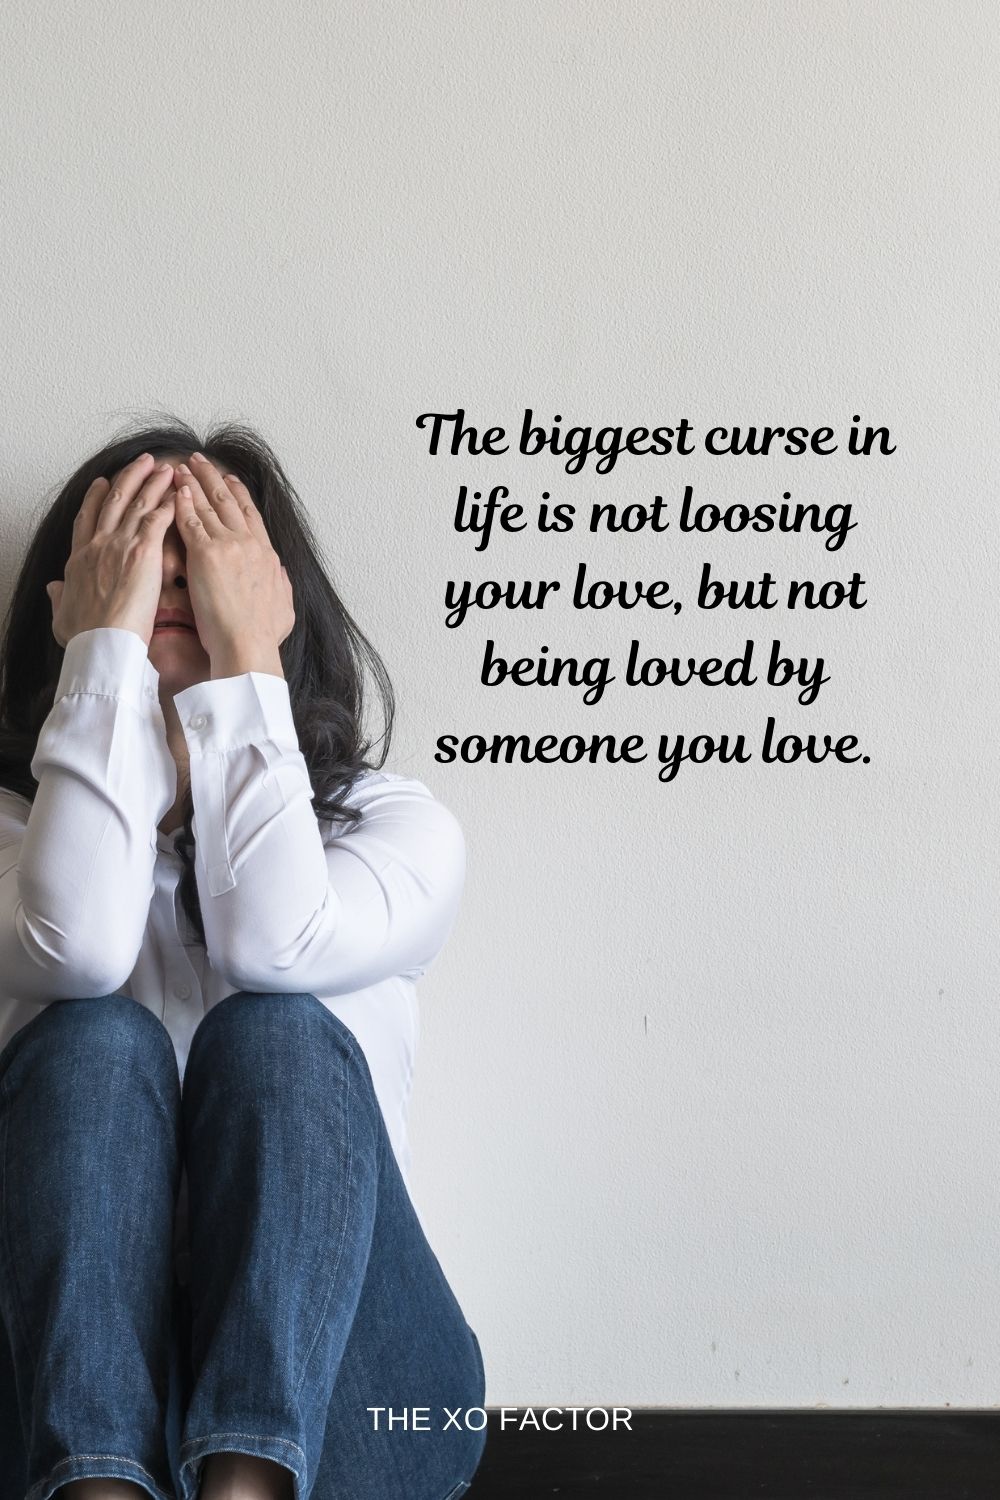 The biggest curse in life is not loosing your love, but not being loved by someone you love.